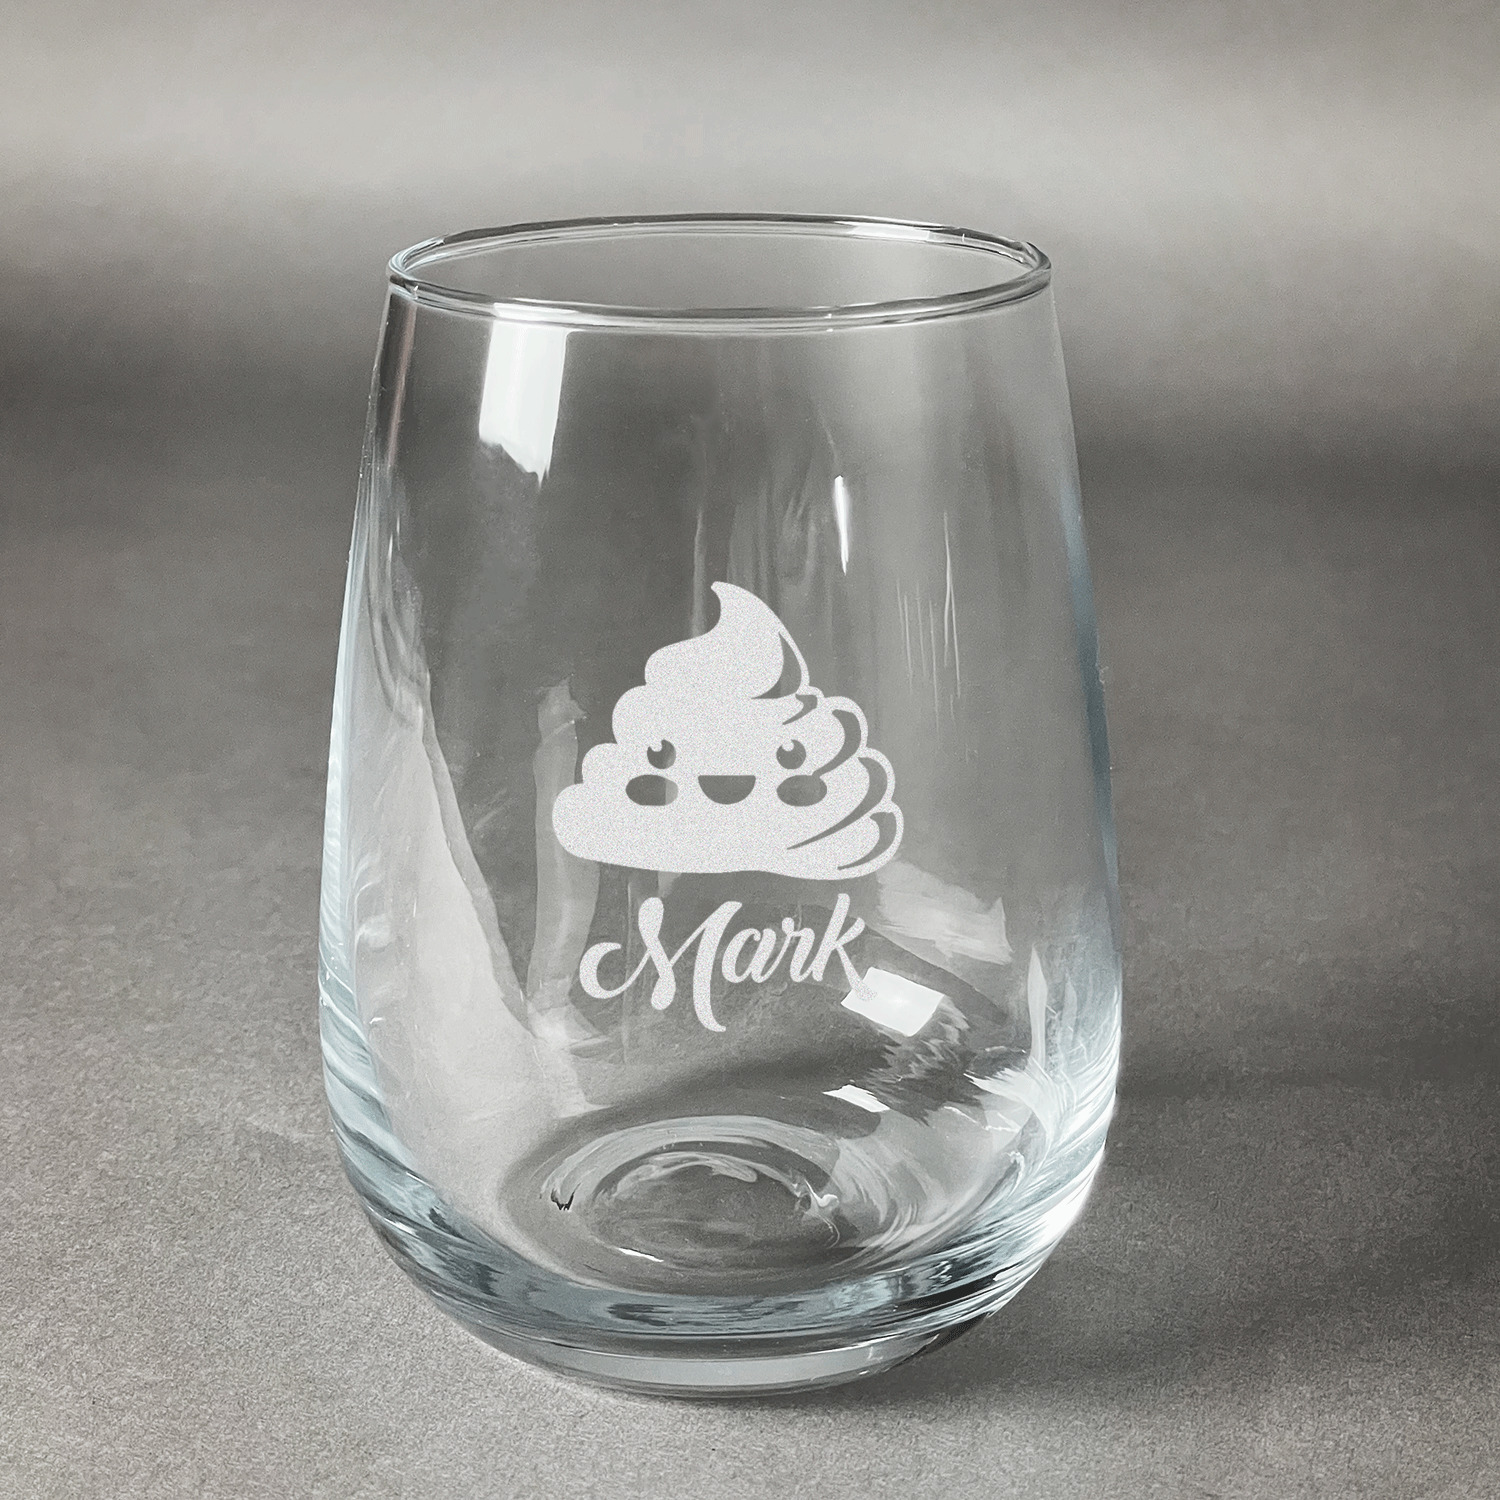 https://www.youcustomizeit.com/common/MAKE/1210994/Poop-Emoji-Stemless-Wine-Glass-Front-Approval.jpg?lm=1682544446